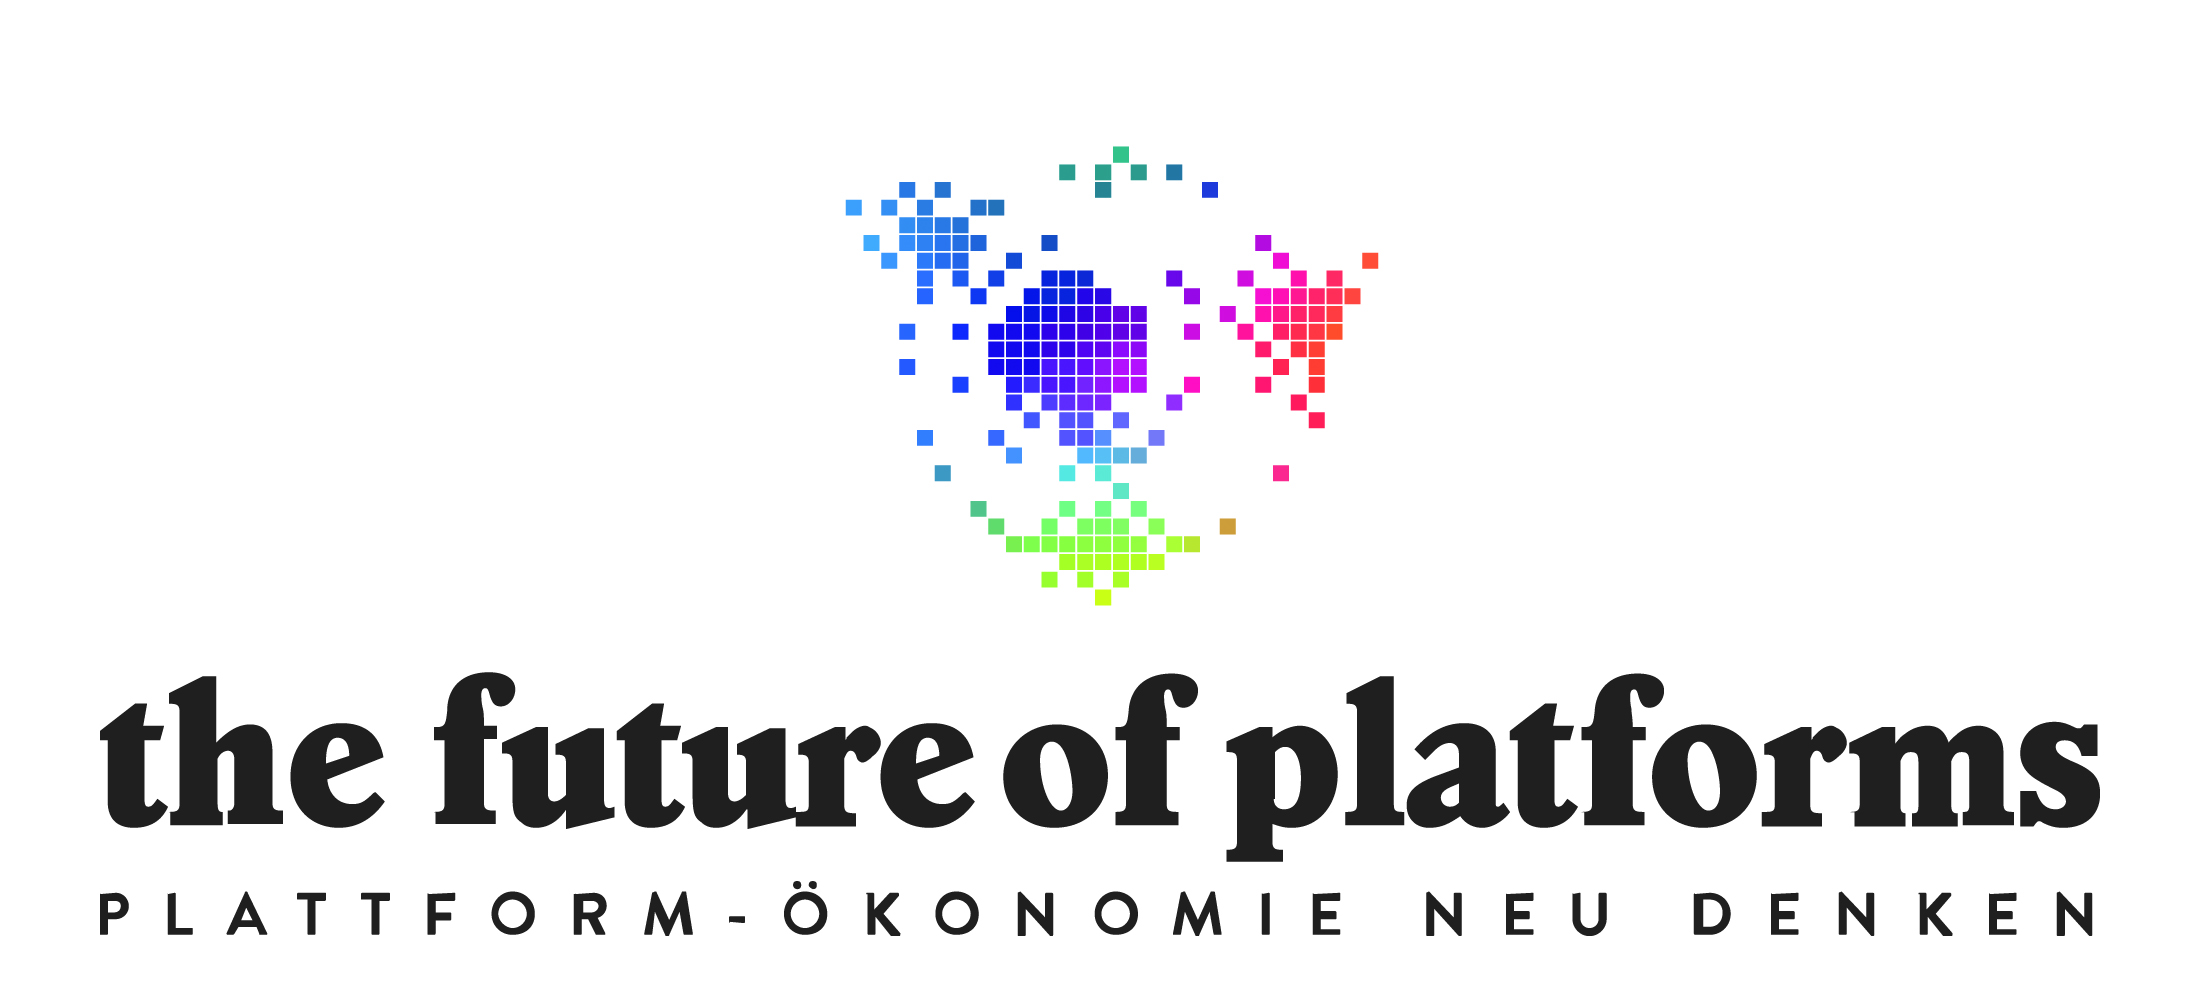 The Future of Platforms